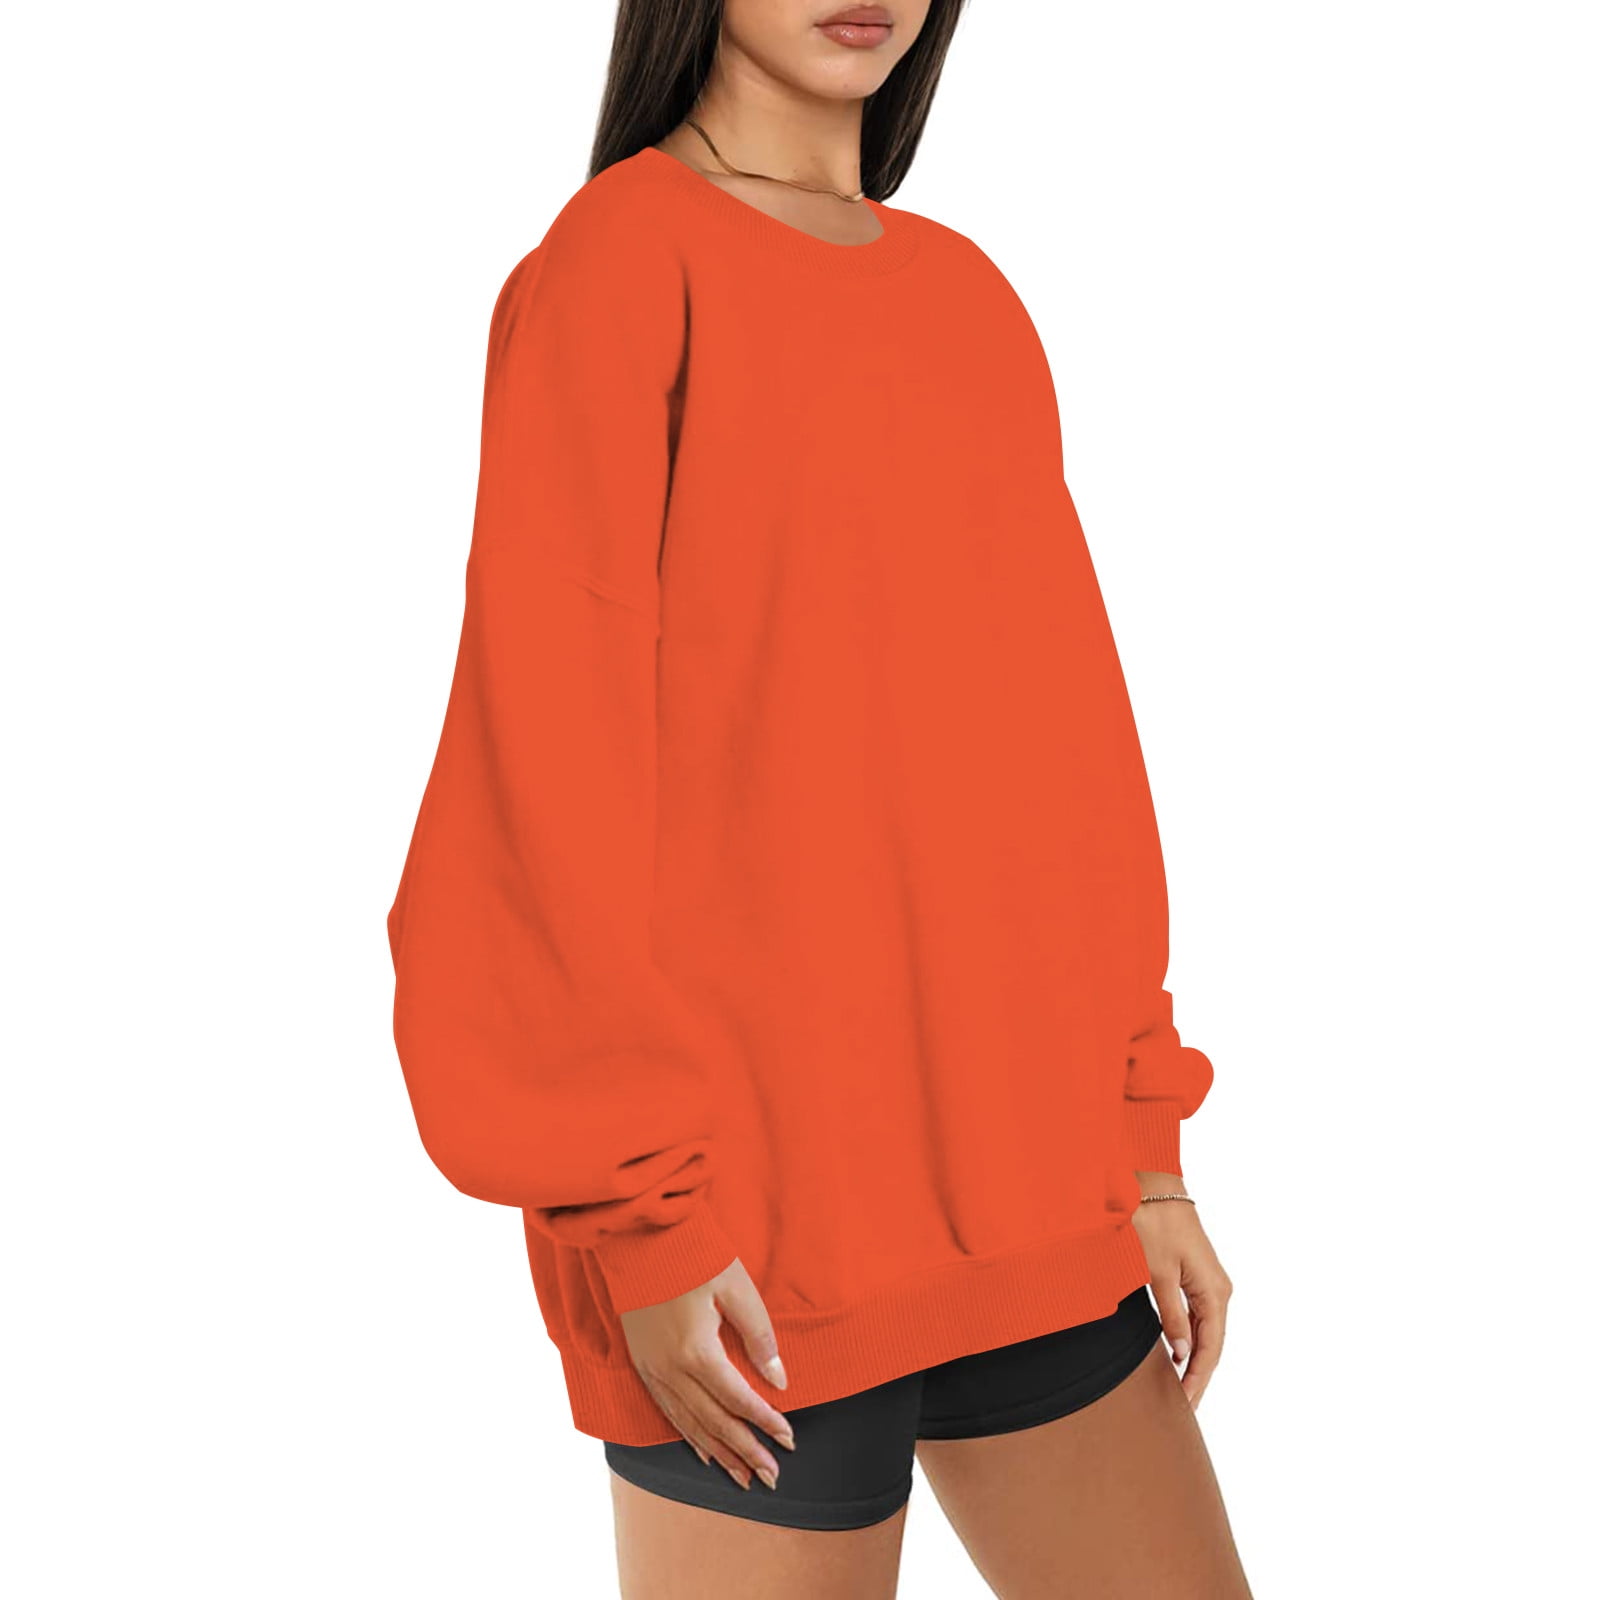 jxsoyen Lightning Deals of Today Prime By Hour Lightning Deals of Today  Oversized Sweatshirt for Women Graphic Sweatshirts Hooded Pullover Tops  Waffle